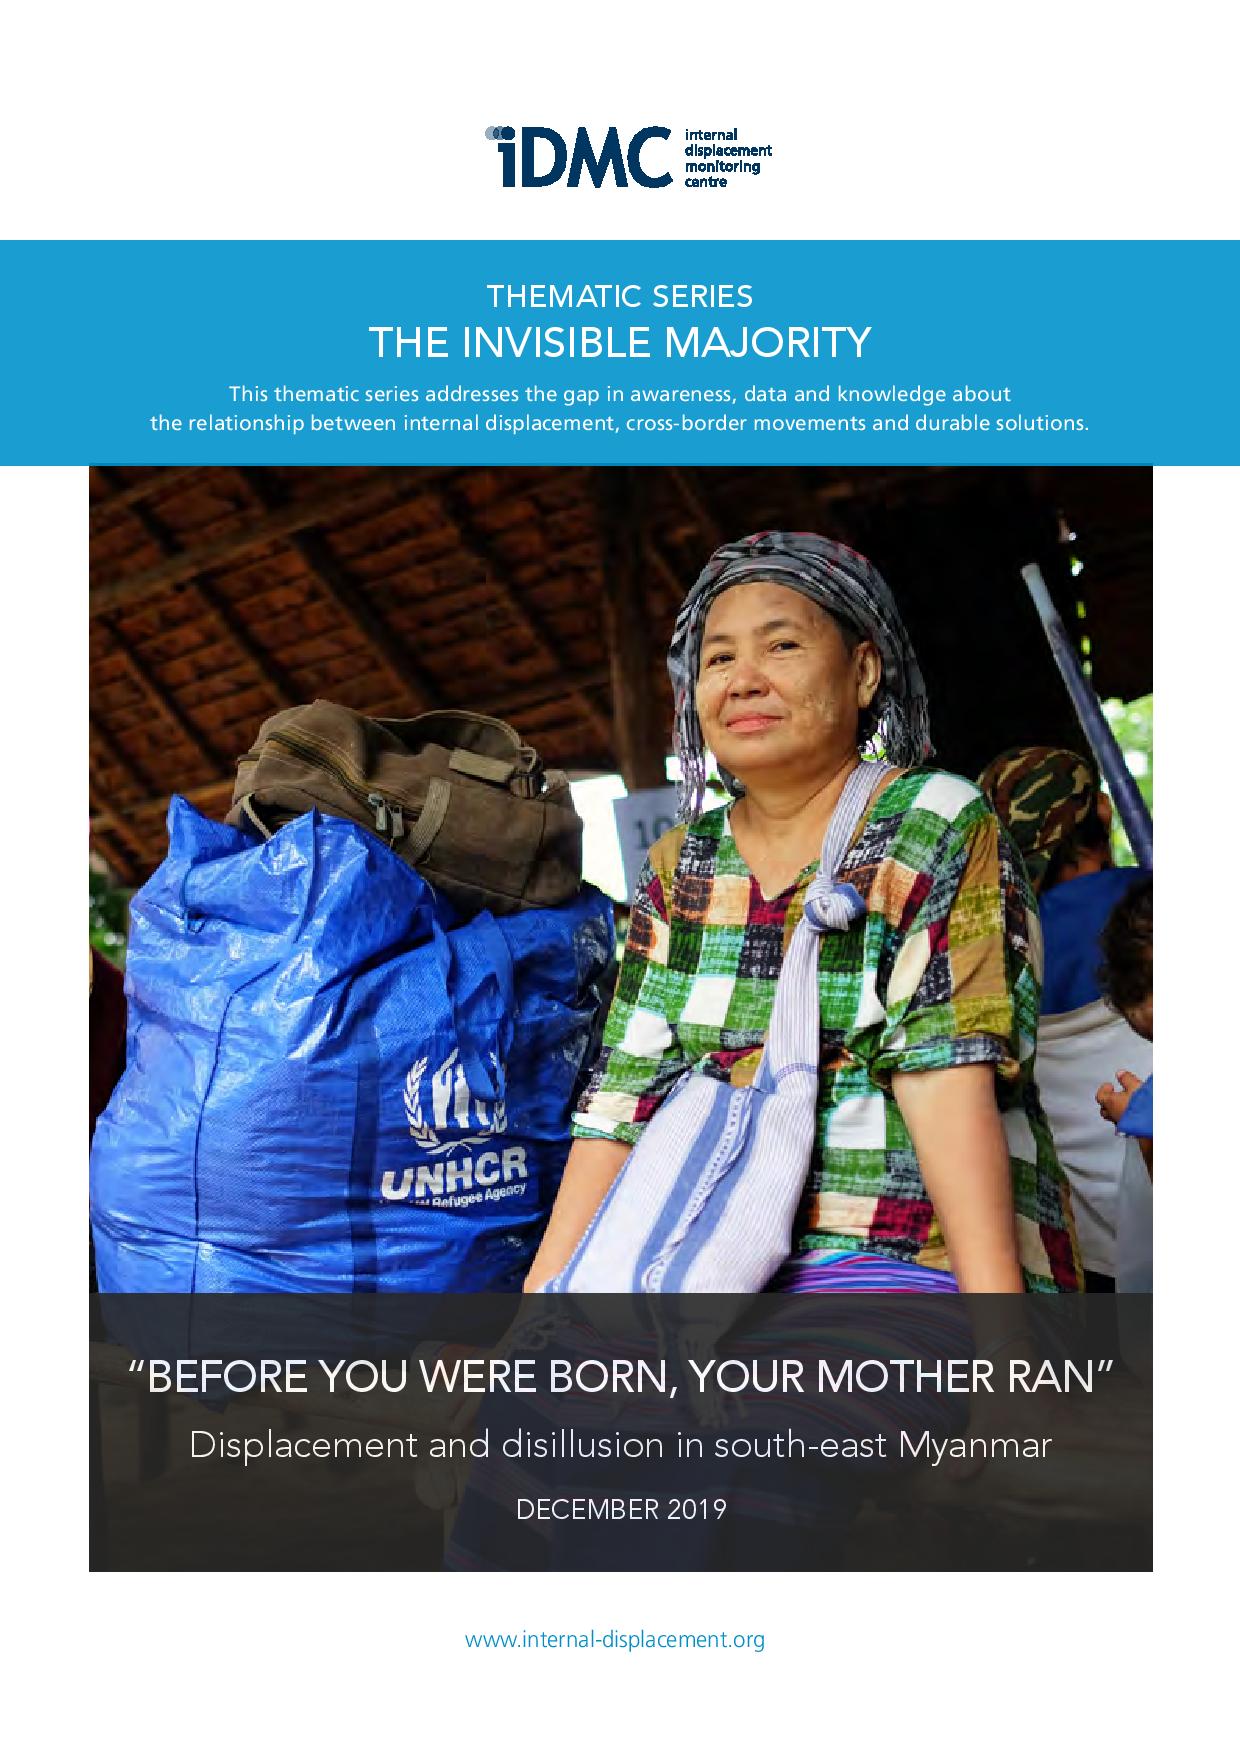 "Before you were born, your mother ran": Displacement and disillusion in south-east Myanmar